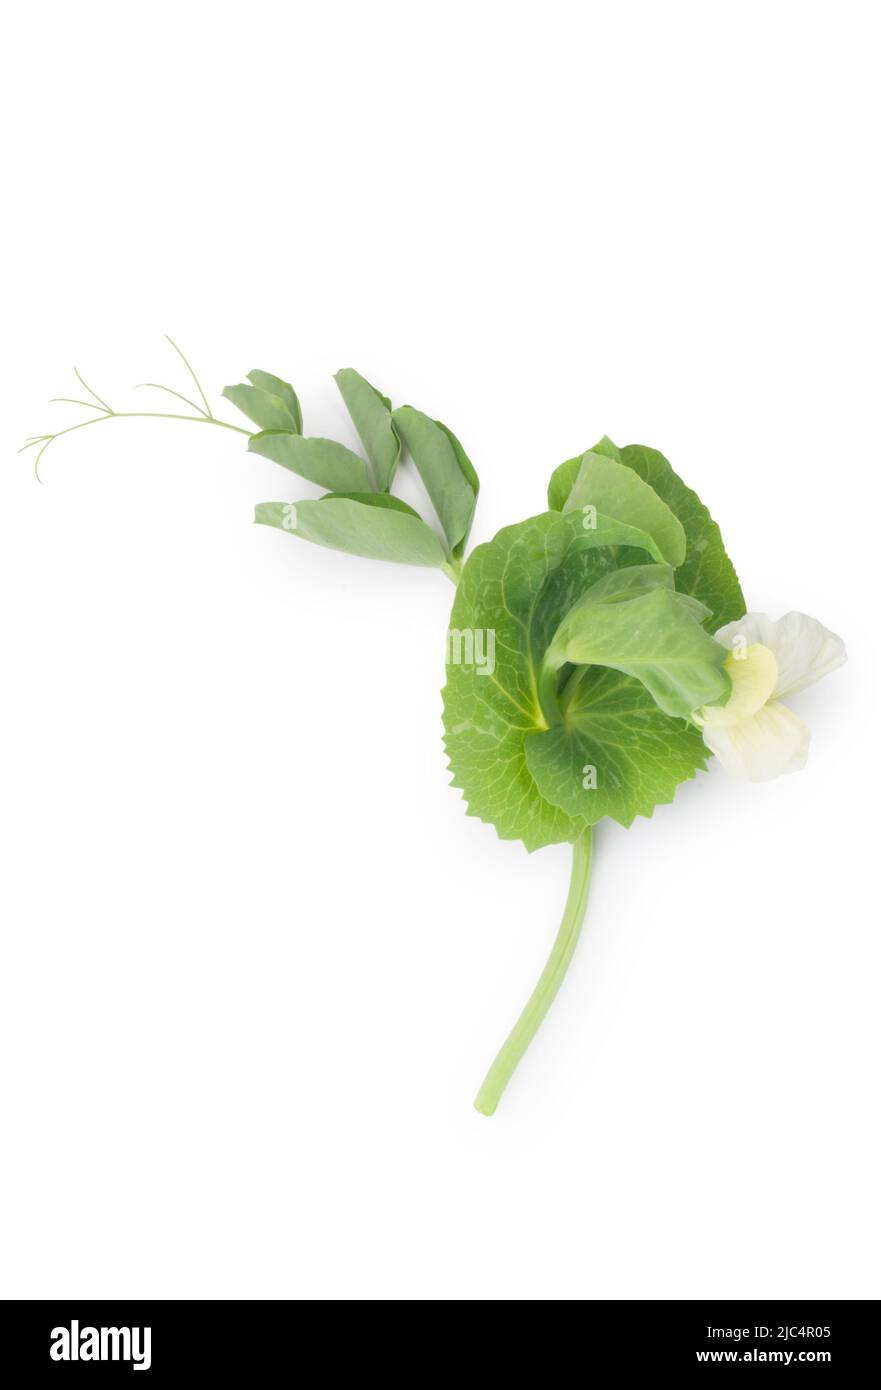 Studio shot of pea shoots cut out against a white background - John Gollop Stock Photo